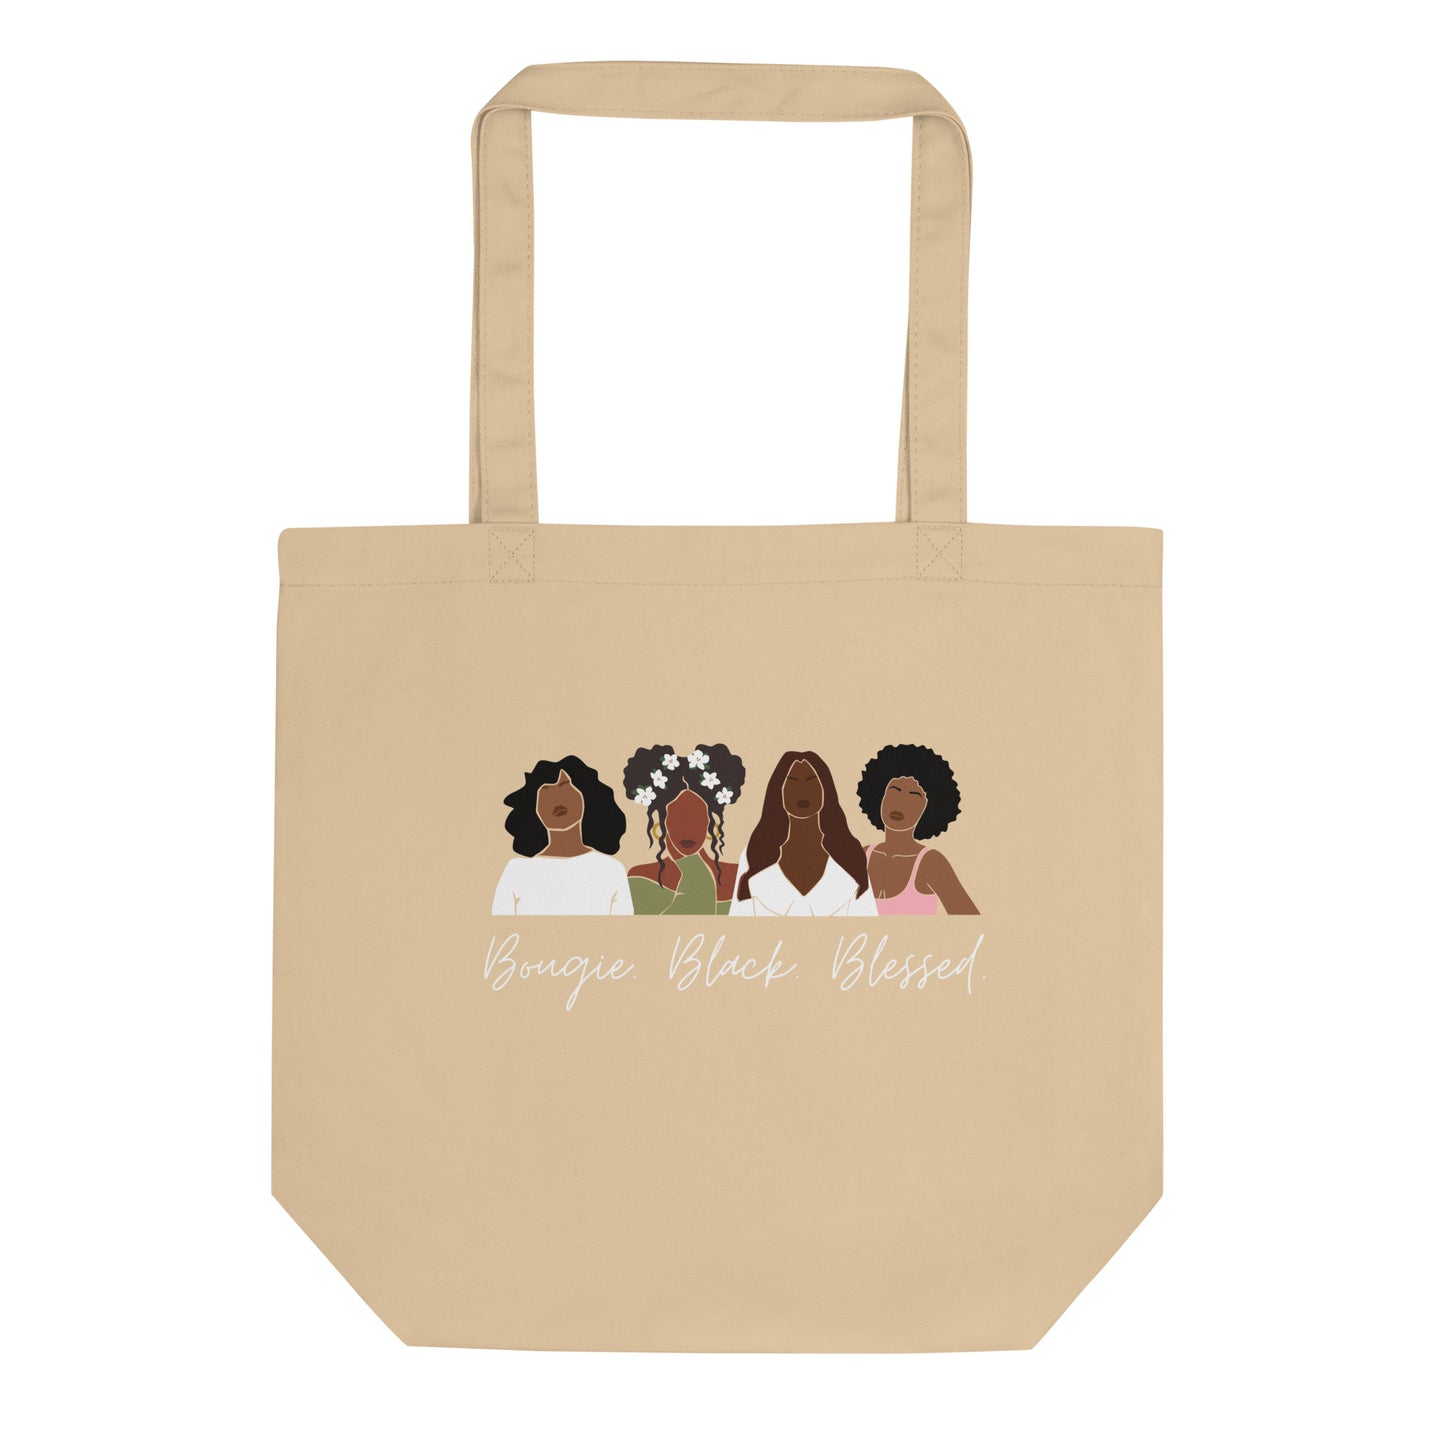 Bougie. Black. Blessed. Eco Tote Bag